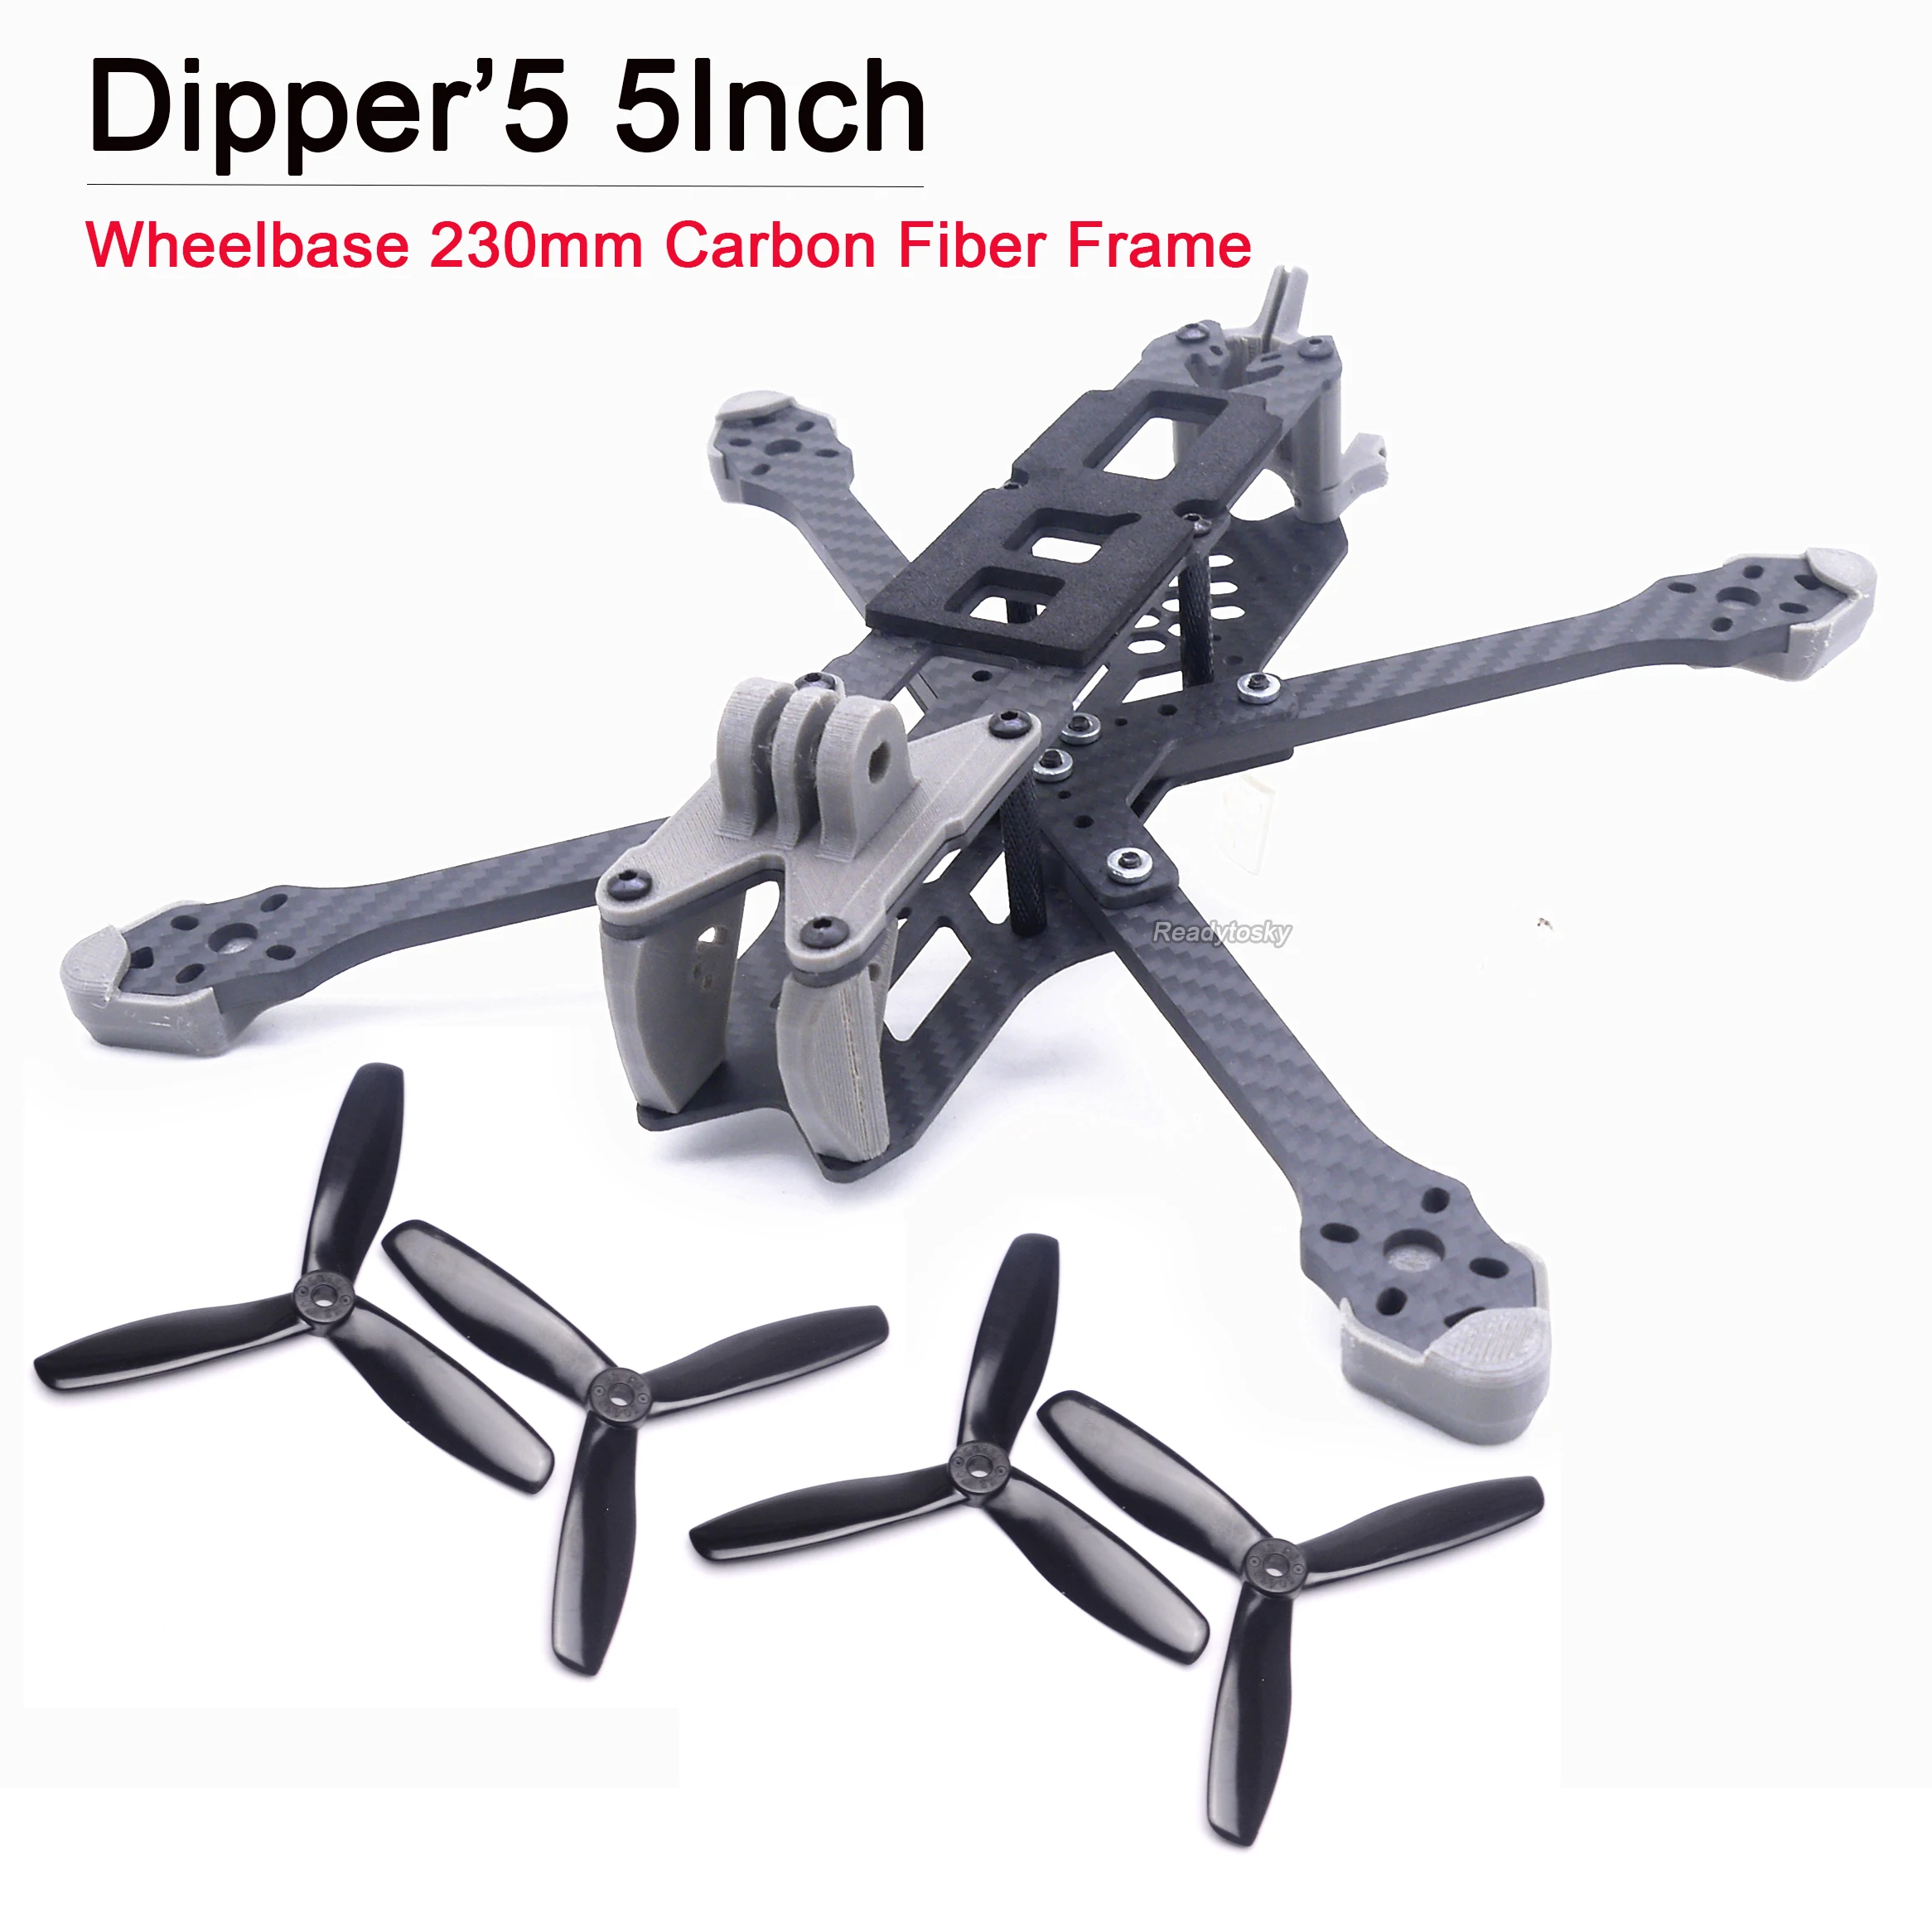 

Dipper’5 Dipper 5Inch 230mm 230 Wheelbase Carbon Fiber Frame Kit w/ TPU Printing Parts for FPV Racing Quadcopter Racer Drone